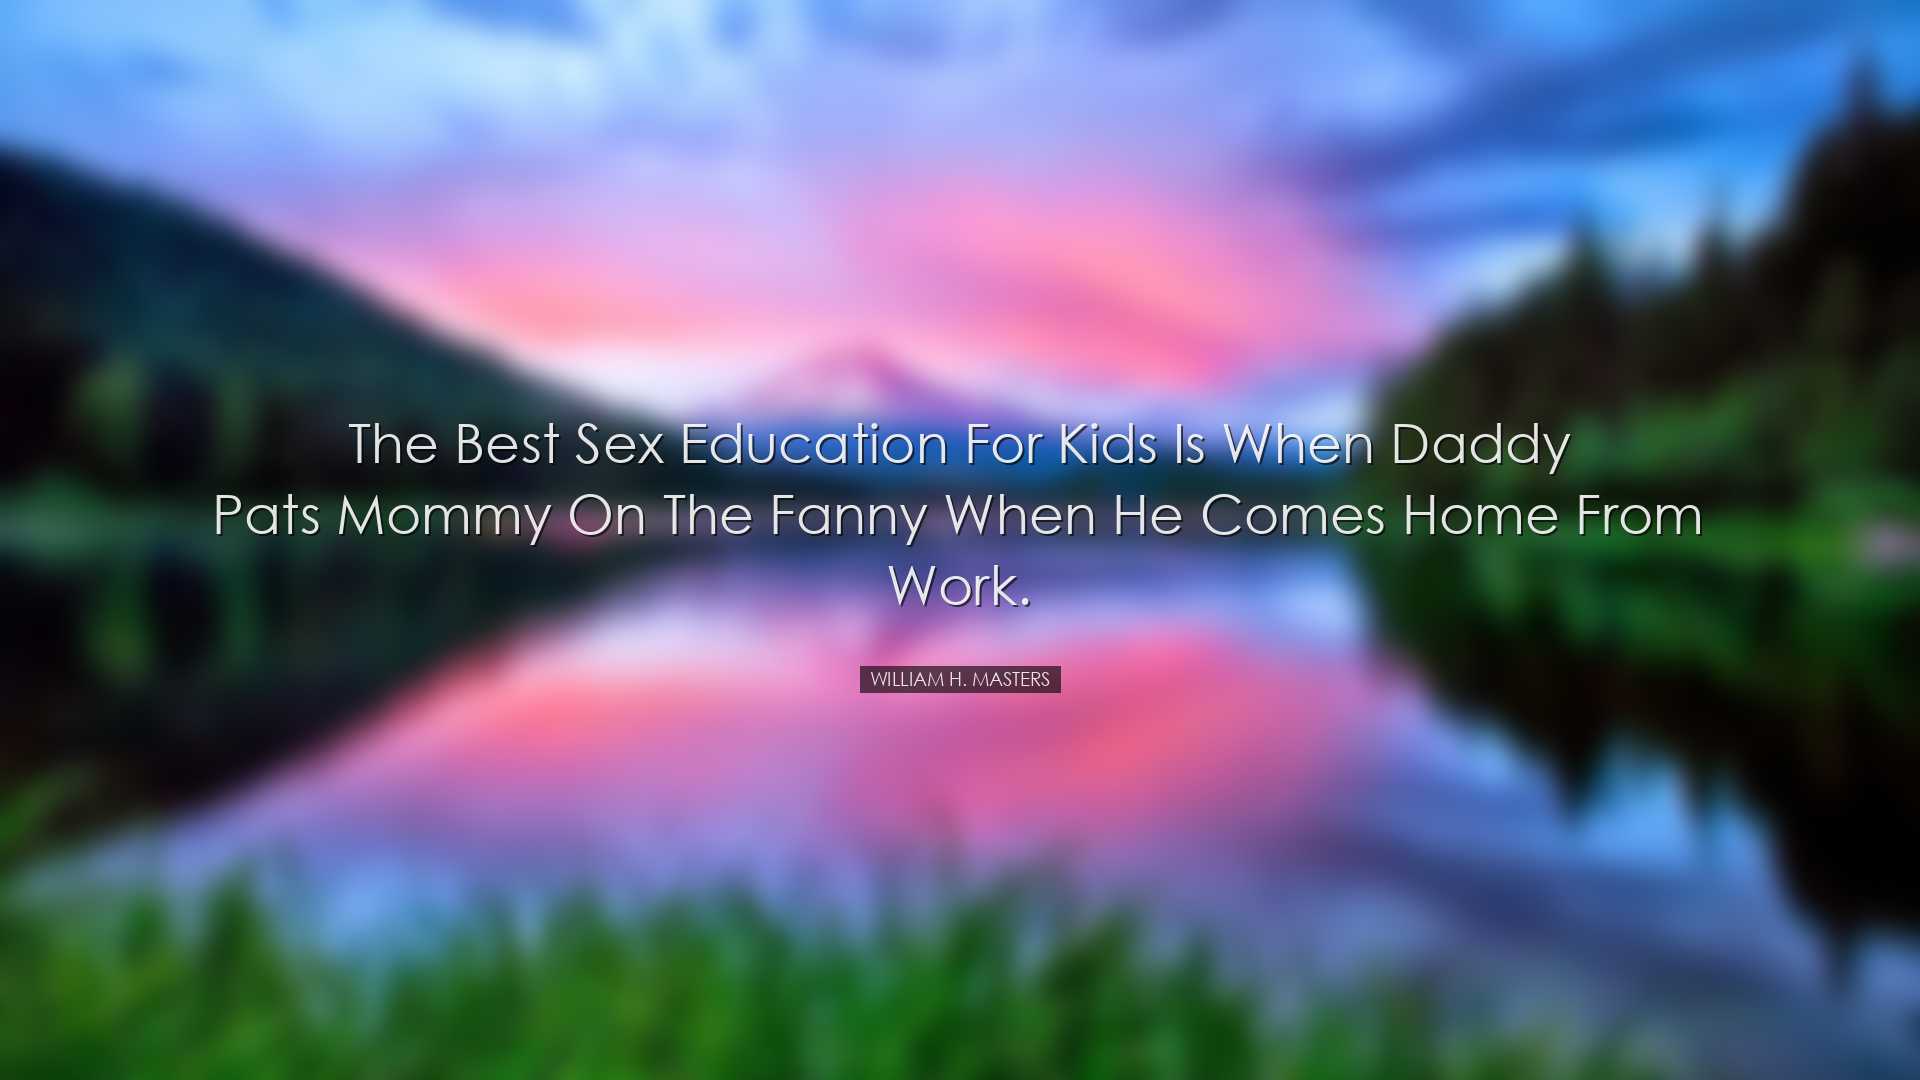 The best sex education for kids is when Daddy pats Mommy on the fa